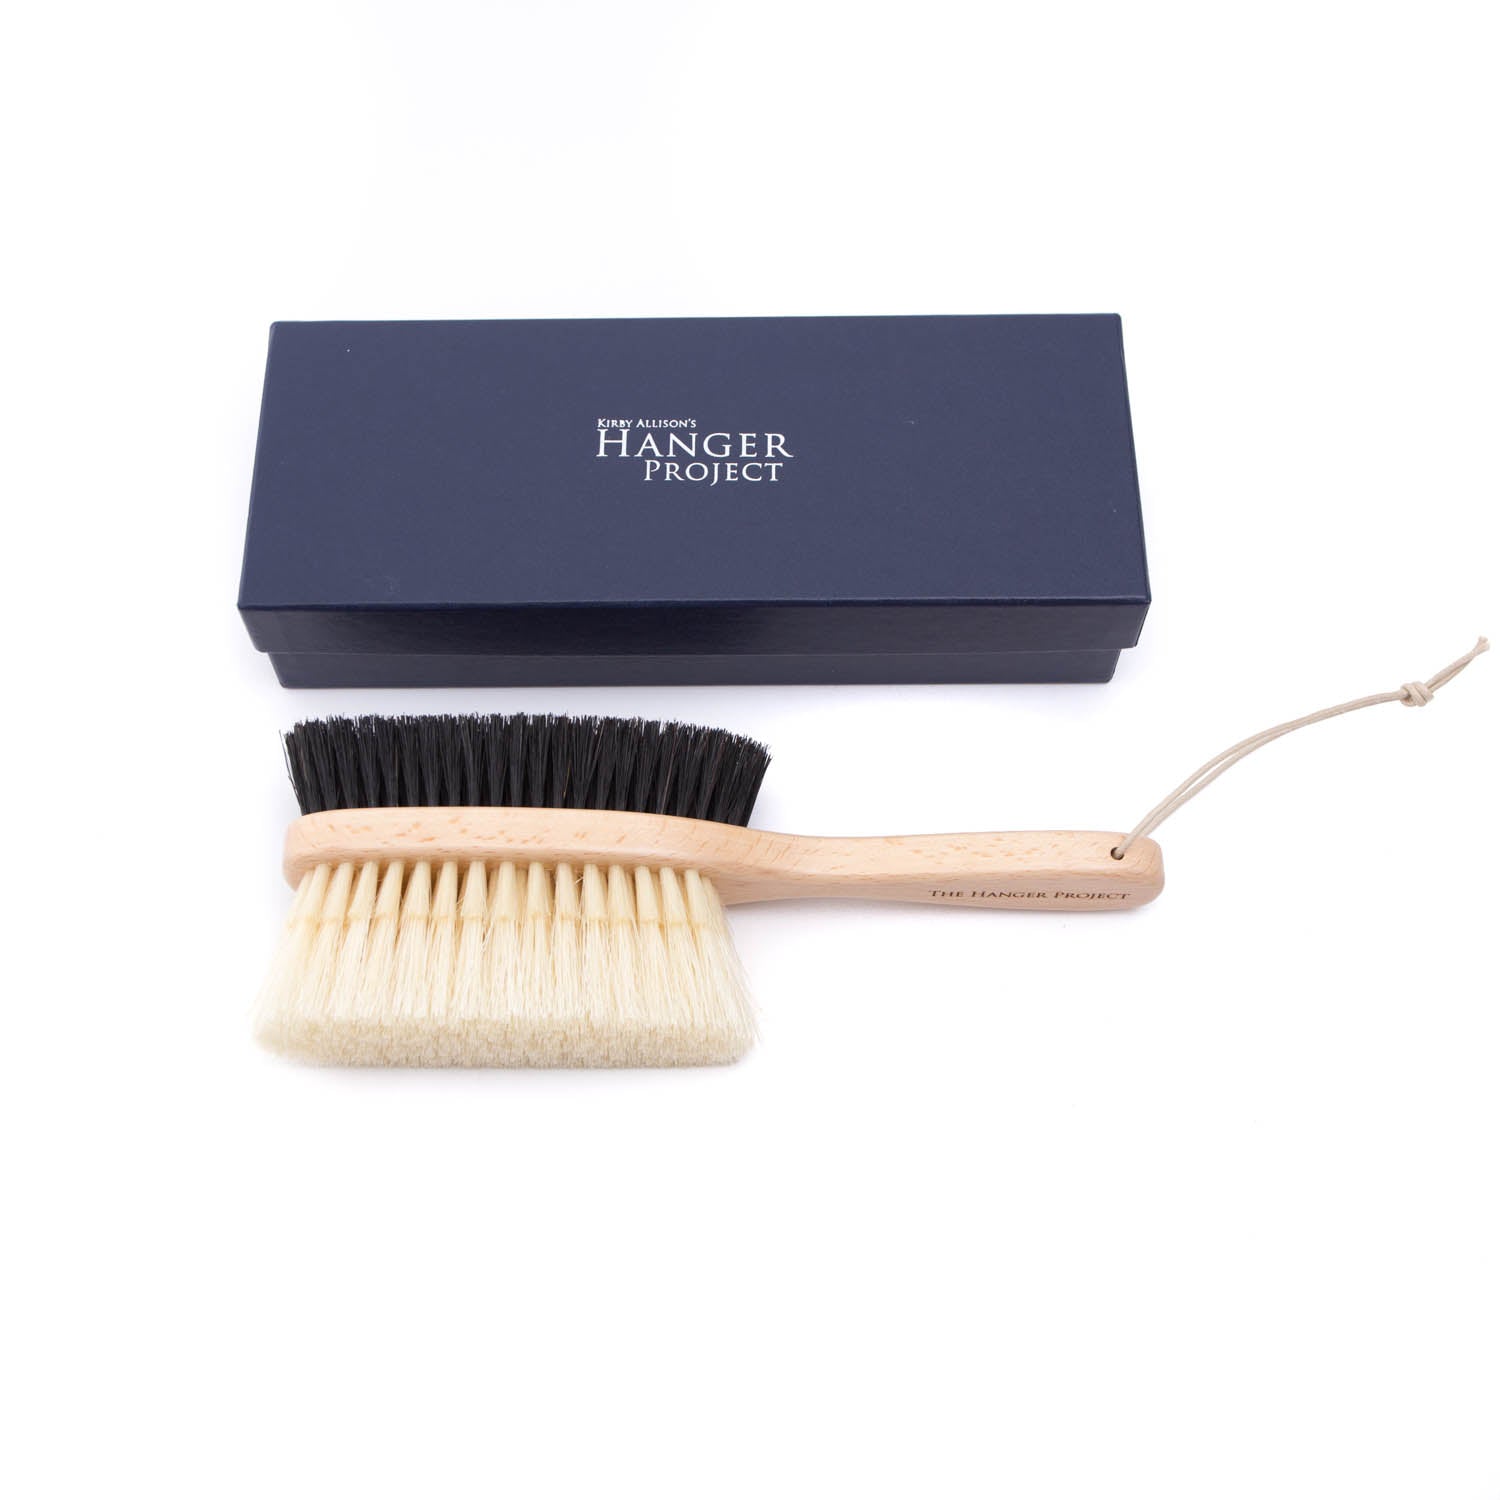 A KirbyAllison.com Deluxe Double-Sided Garment Brush with a blue box and a wooden handle.